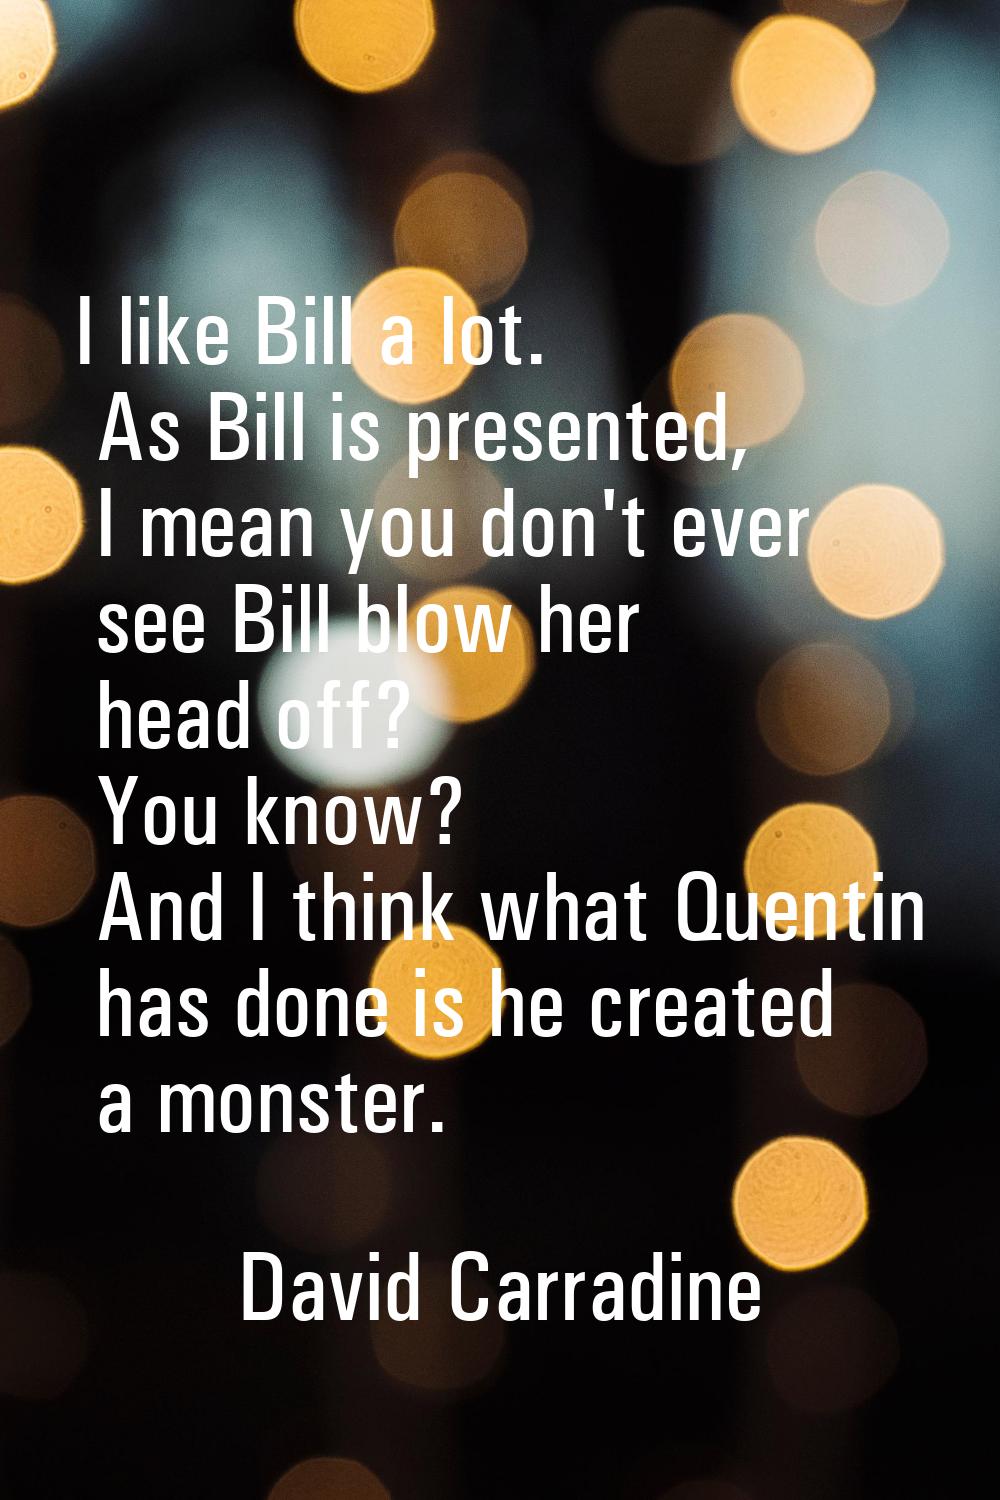 I like Bill a lot. As Bill is presented, I mean you don't ever see Bill blow her head off? You know